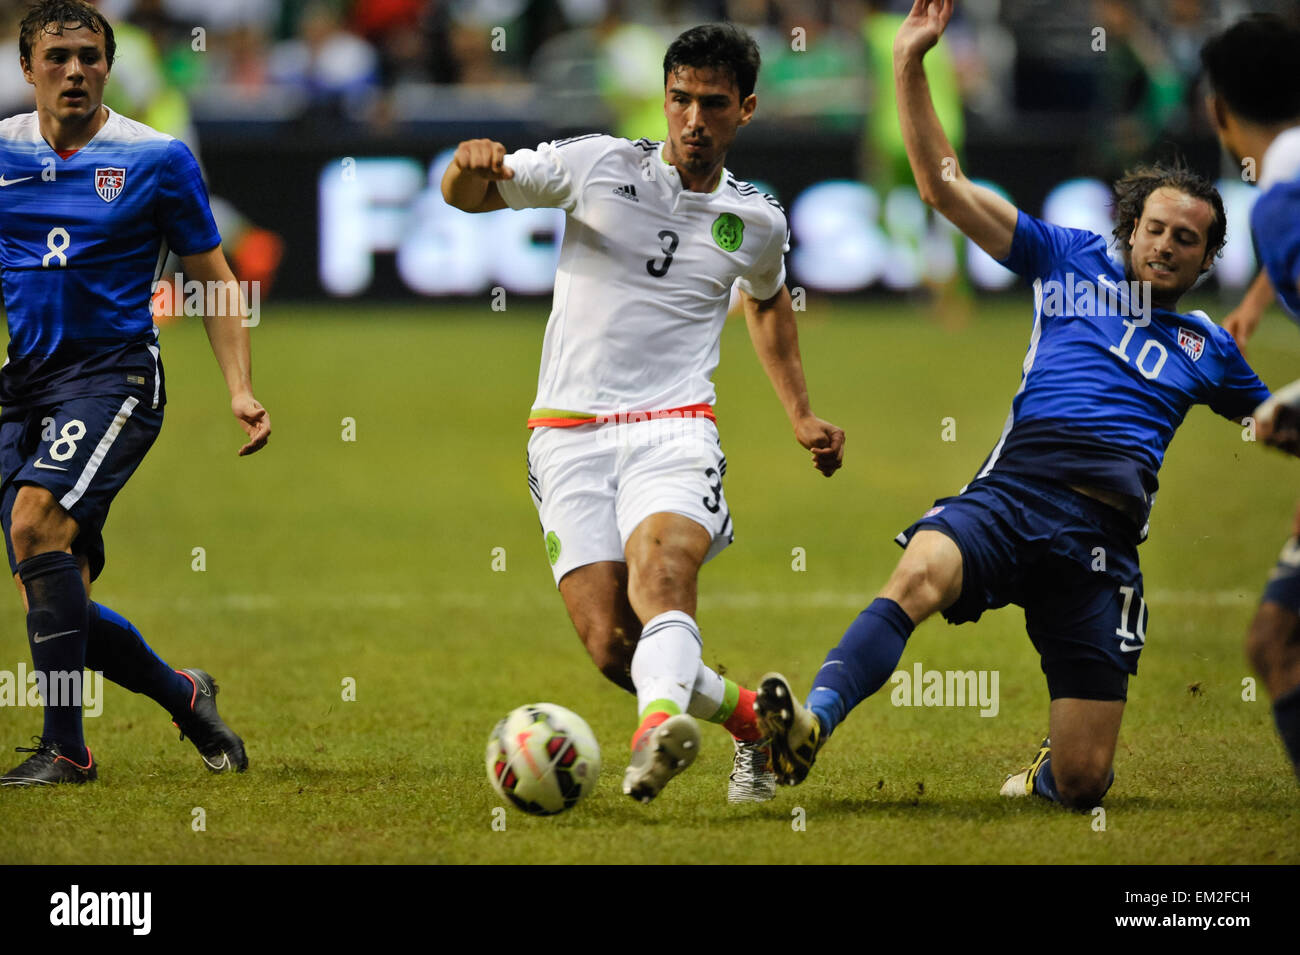 San Antonio, TX, USA. 15th Apr, 2015. Mexico's Oswaldo Alanis controls the ball in front of USA's Mix Diskerud during a friendly match Wednesday April 15, 2015 at the Alamodome in San Antonio, Texas. The US Men's National team defeated Mexico, 2-0. © Bahram Mark Sobhani/ZUMA Wire/Alamy Live News Stock Photo